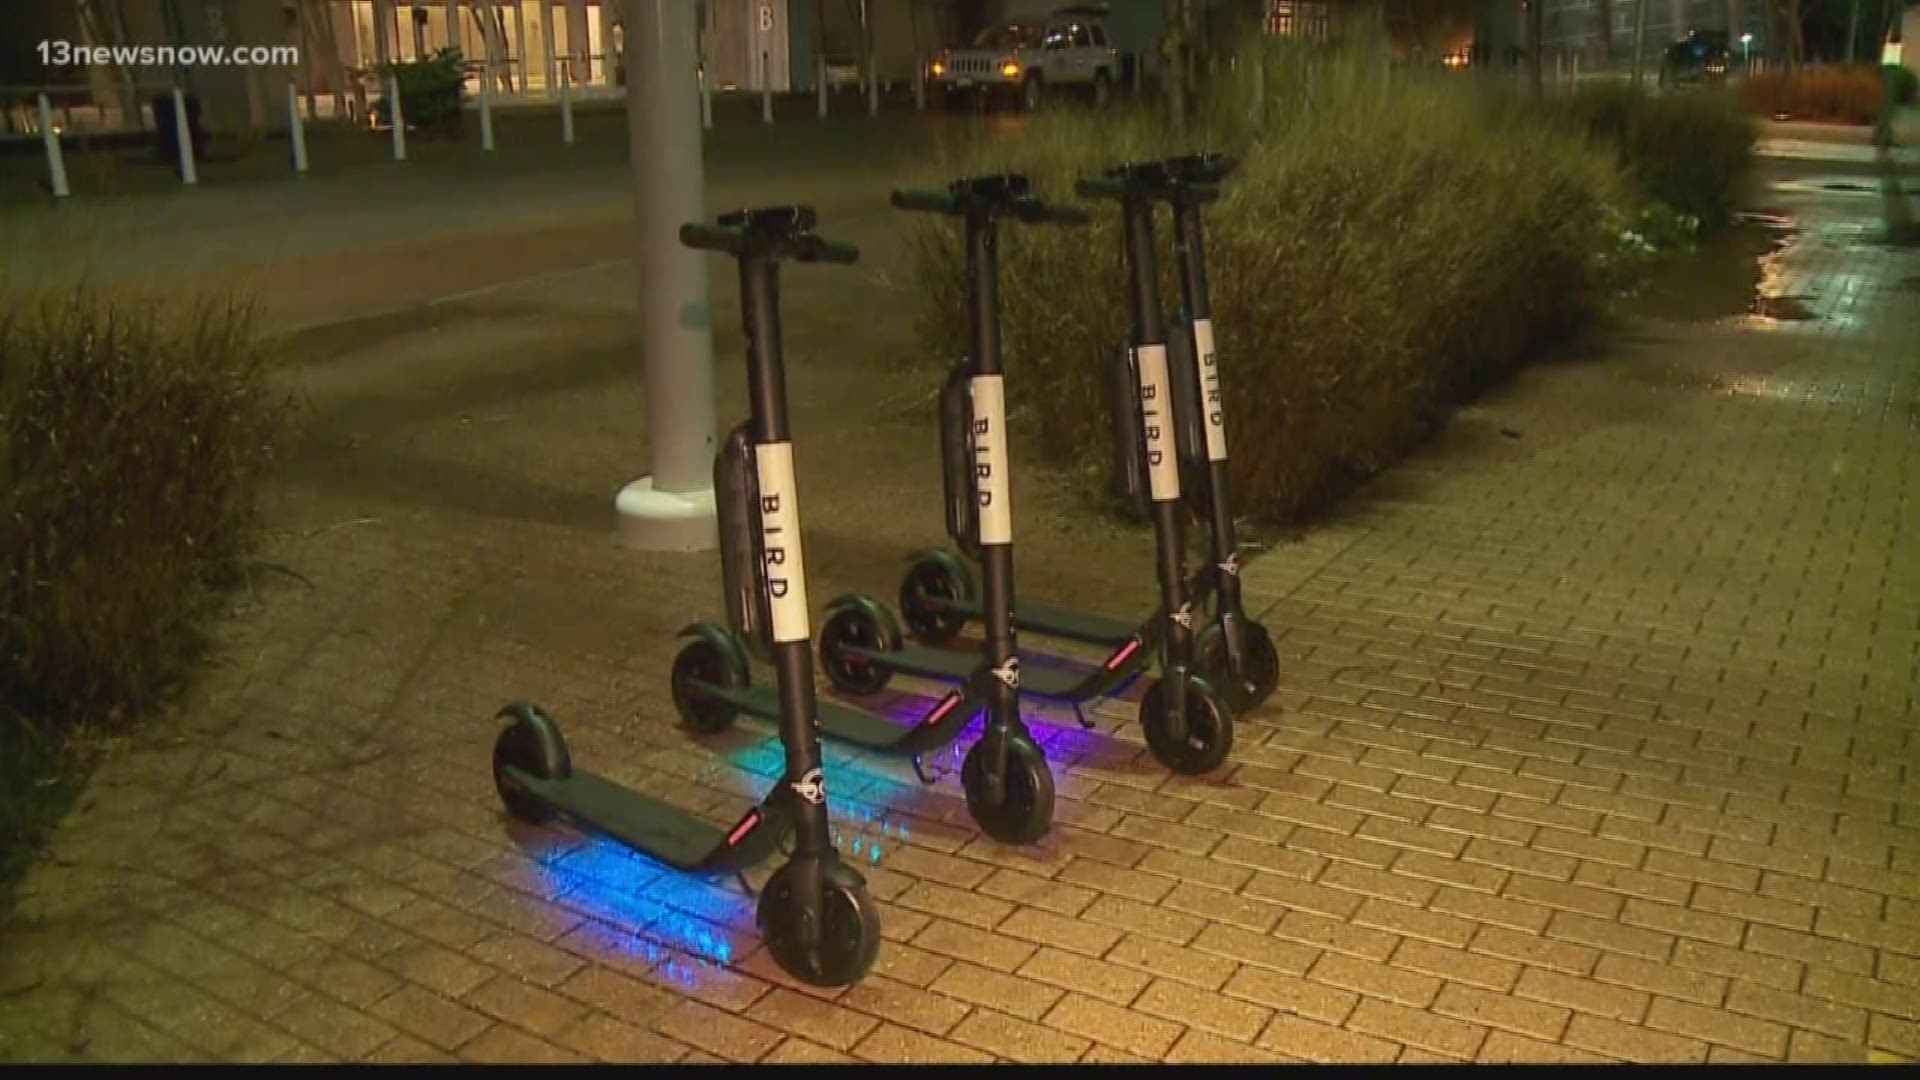 13News Now reporter Megan Shinn introduces us to one Bird employee we saw setting scooters out at the Virginia Beach Convention Center.